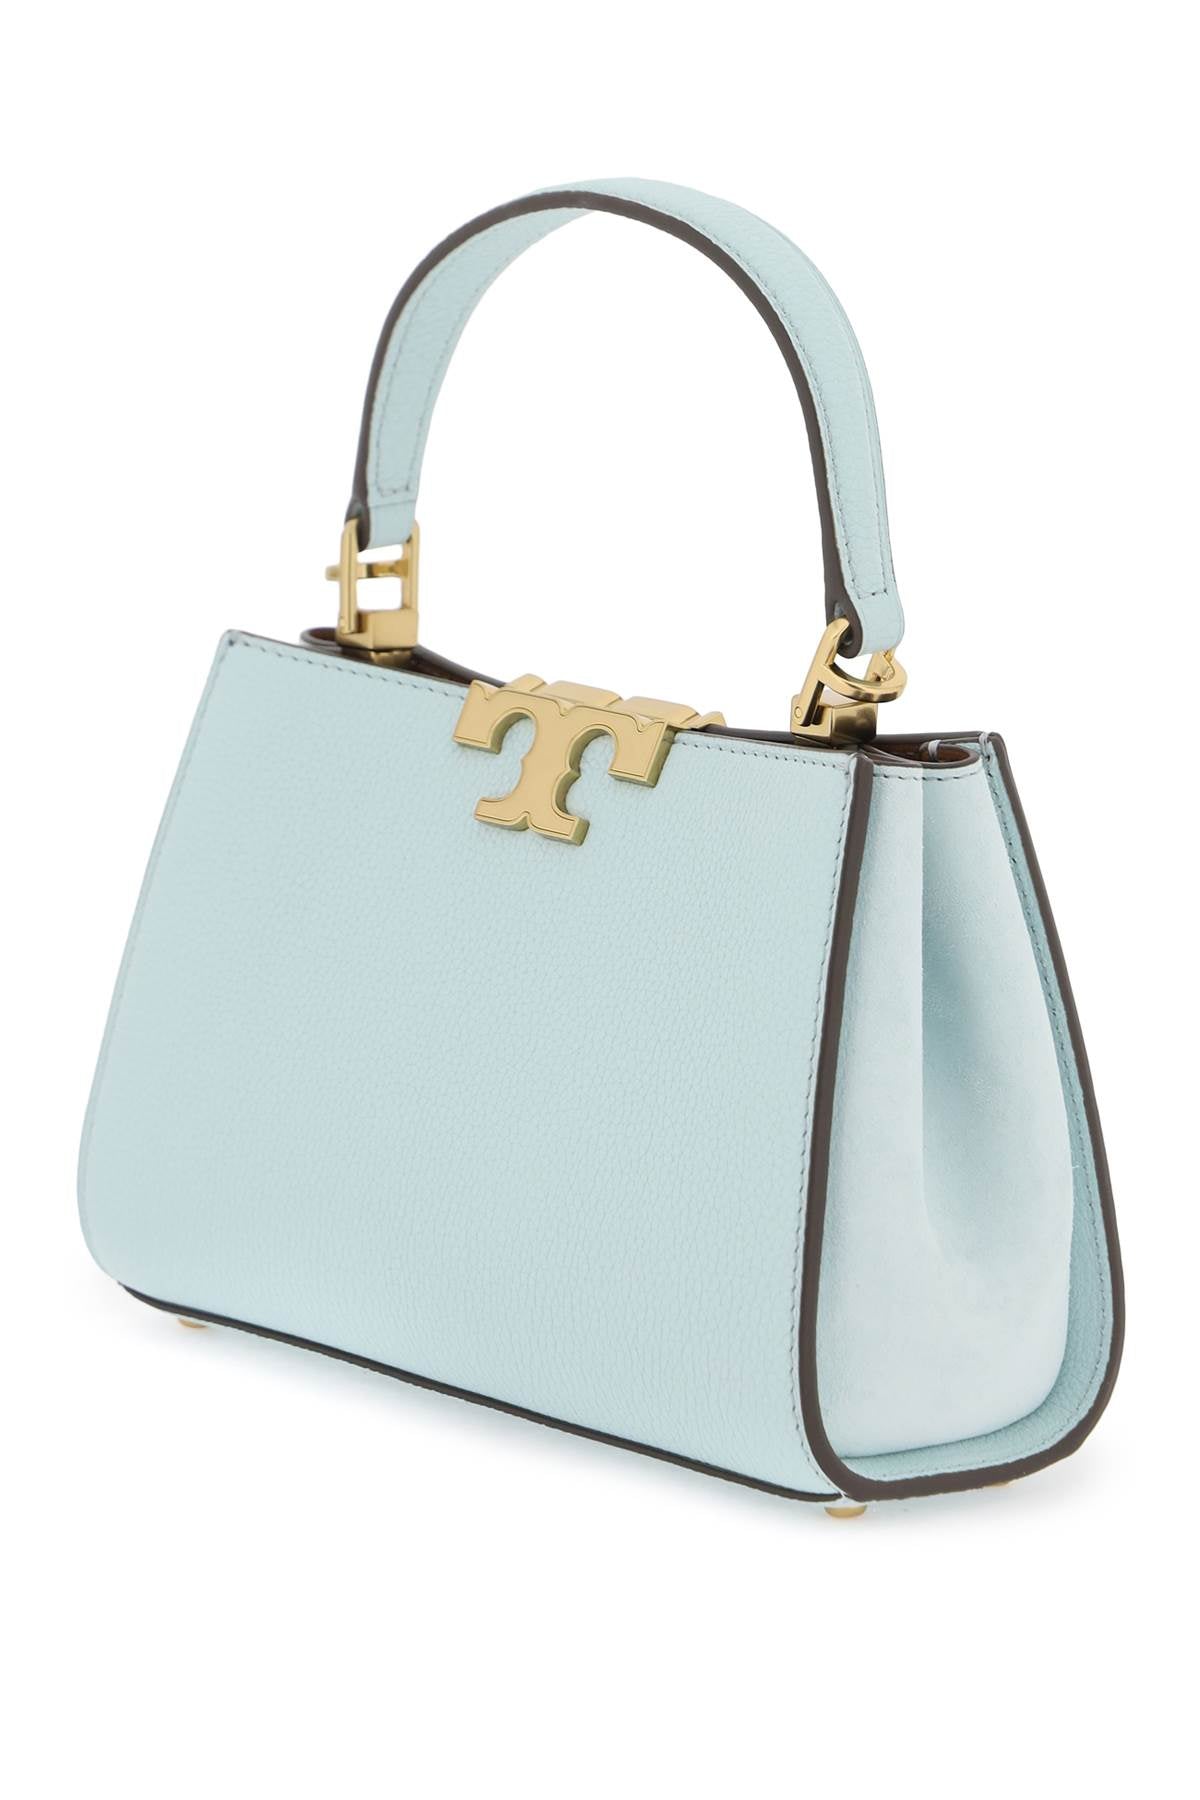 TORY BURCH Eleanor Mini Light Blue Leather Handbag with Suede Accents and Gold-Tone Hardware